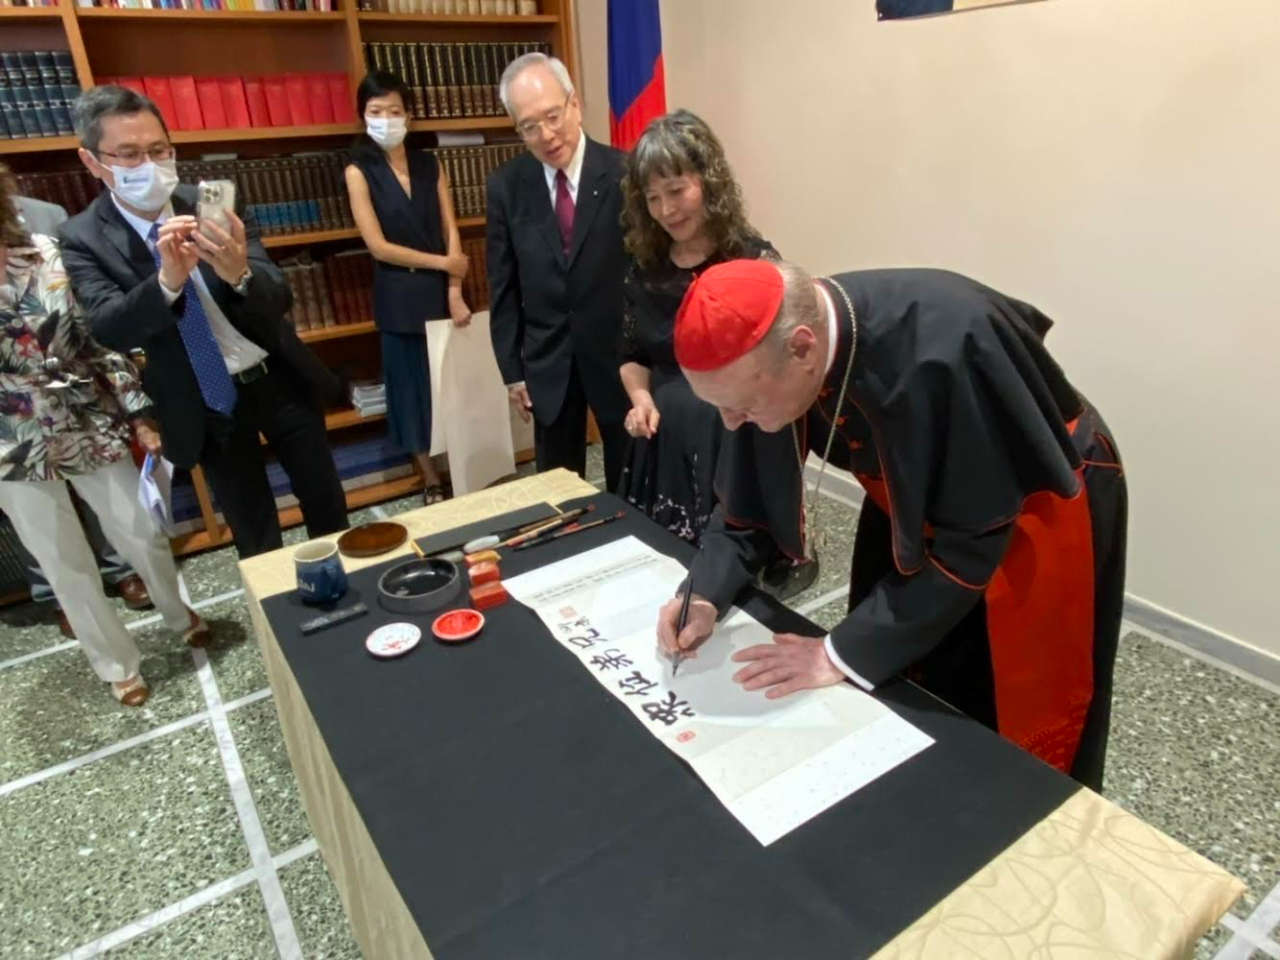      “St. Paul used to say that we must praise God with words, work and lyrics,” said Cardinal Gianfranco Ravasi at the inauguration ceremony of “Friendly Taiwan meets Fratelli tutti” exhibition held on Friday, July 1st, 2022 at the Chancery of the ROC (Taiwan) Embassy to the Holy See. He then added that “The truth conveyed by the contents of Fratelli tutti encourages us to do good but, at the same time, it is also conveyed through the artworks of Taiwanese artists.
Cardinal Ravasi of the Dicastery for Culture and Education opened the exhibition with a prayer as to include the voice of Pope Francis through a passage of Fratelli tutti: “Inspire in us a dream of renewed encounter, dialogue, justice and peace. Move us to create healthier societies and a more dignified world, a world without hunger, poverty, violence and war.”
     Inspired by the Pope’s “Culture of Encounter,” the exhibition features 18 religious calligraphy and 12 calligraphic ink painting works created by well-known Taiwanese American artists Maw Chyuan Wang and Karen Shee. Among the guests, a delegation of authorities from Taiwan, the Holy See, as well as members of the Diplomatic Corps and religious congregations.
     The thirty pieces on display contain excerpts from the Bible and the Pope’s encyclicals Laudatosì and Fratelli tutti,and other inspiring phrases to highlight Taiwan’s commitment and joint efforts with the Holy See to advance global human rights and welfare, democracy, freedom, and environmental protection. As reminded by Ambassador Matthew S.M. LEE: “The similarities between Taiwan and the Holy See are not only in the forms of artistic expression, but also in the values shared by both sides: democracy, freedom, and human rights.” 
     “Friendly Taiwan meets Fratelli tutti” exhibition celebrates the 80th anniversary of diplomatic relations between the Republic of China (Taiwan) and the Holy See by combining the Sacred Scripture with the beauty of Taiwanese calligraphy to give the audience an original and innovative experience. 

